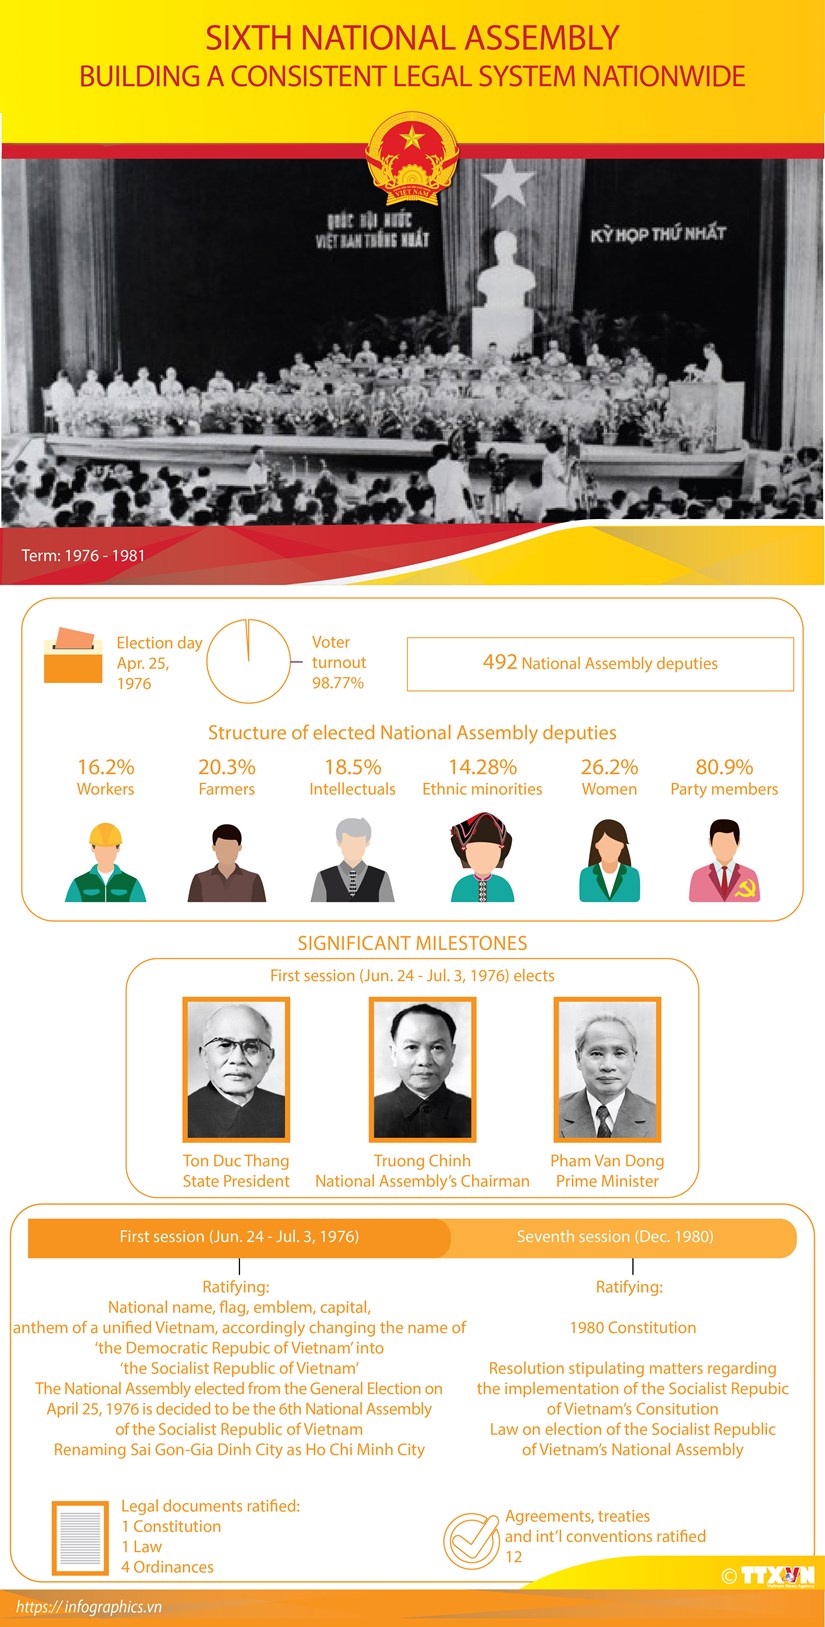 Sixth National Assembly: Building a consistent legal system nationwide hinh anh 1